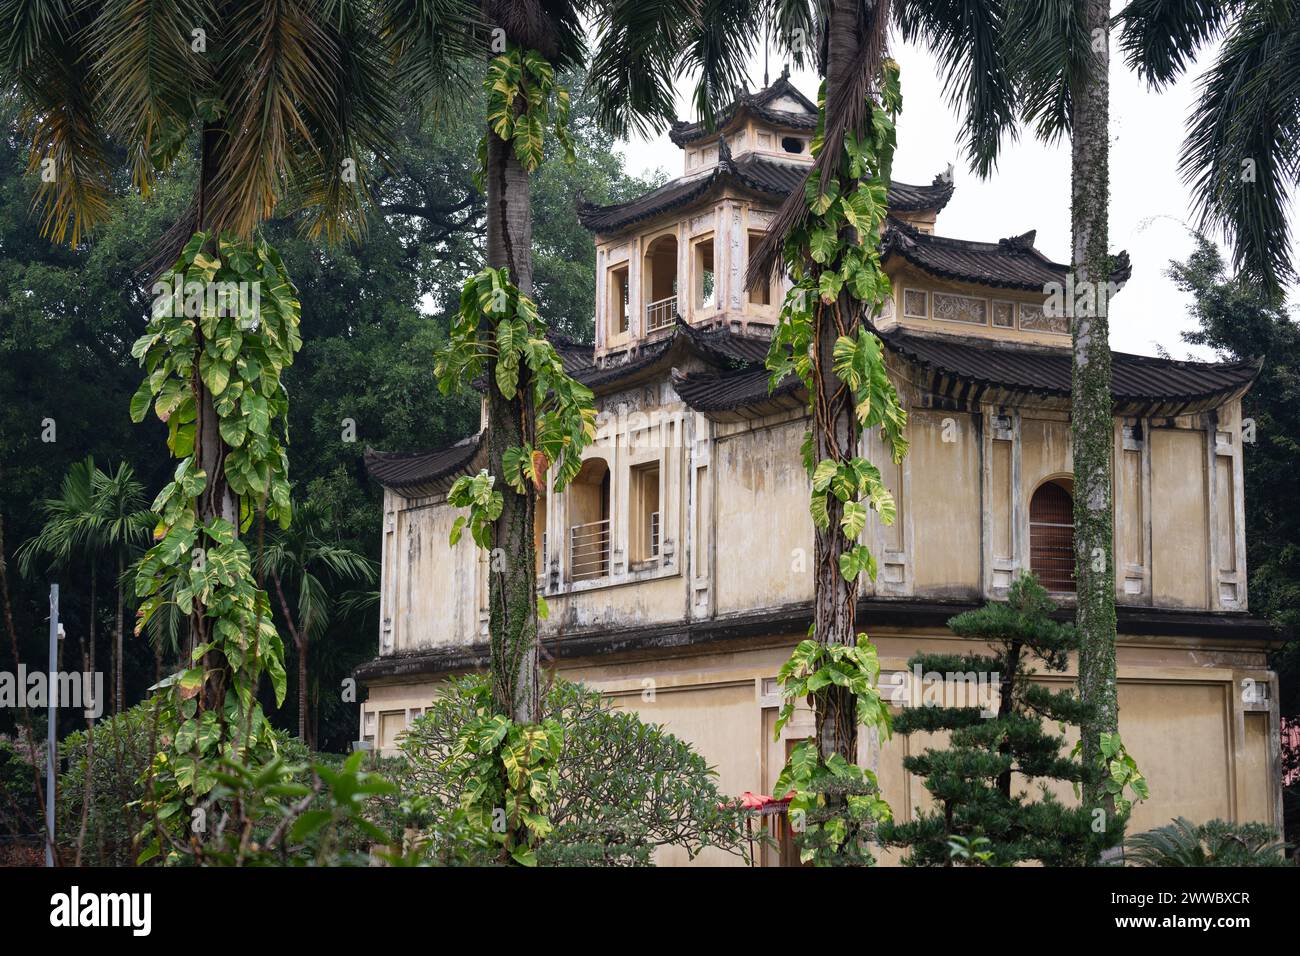 Imperial Citadel of Thang Long. A glimpse of the elegant Princess Palace nestled amidst a forest of trees, evoking a sense of enchantment and grandeur Stock Photo